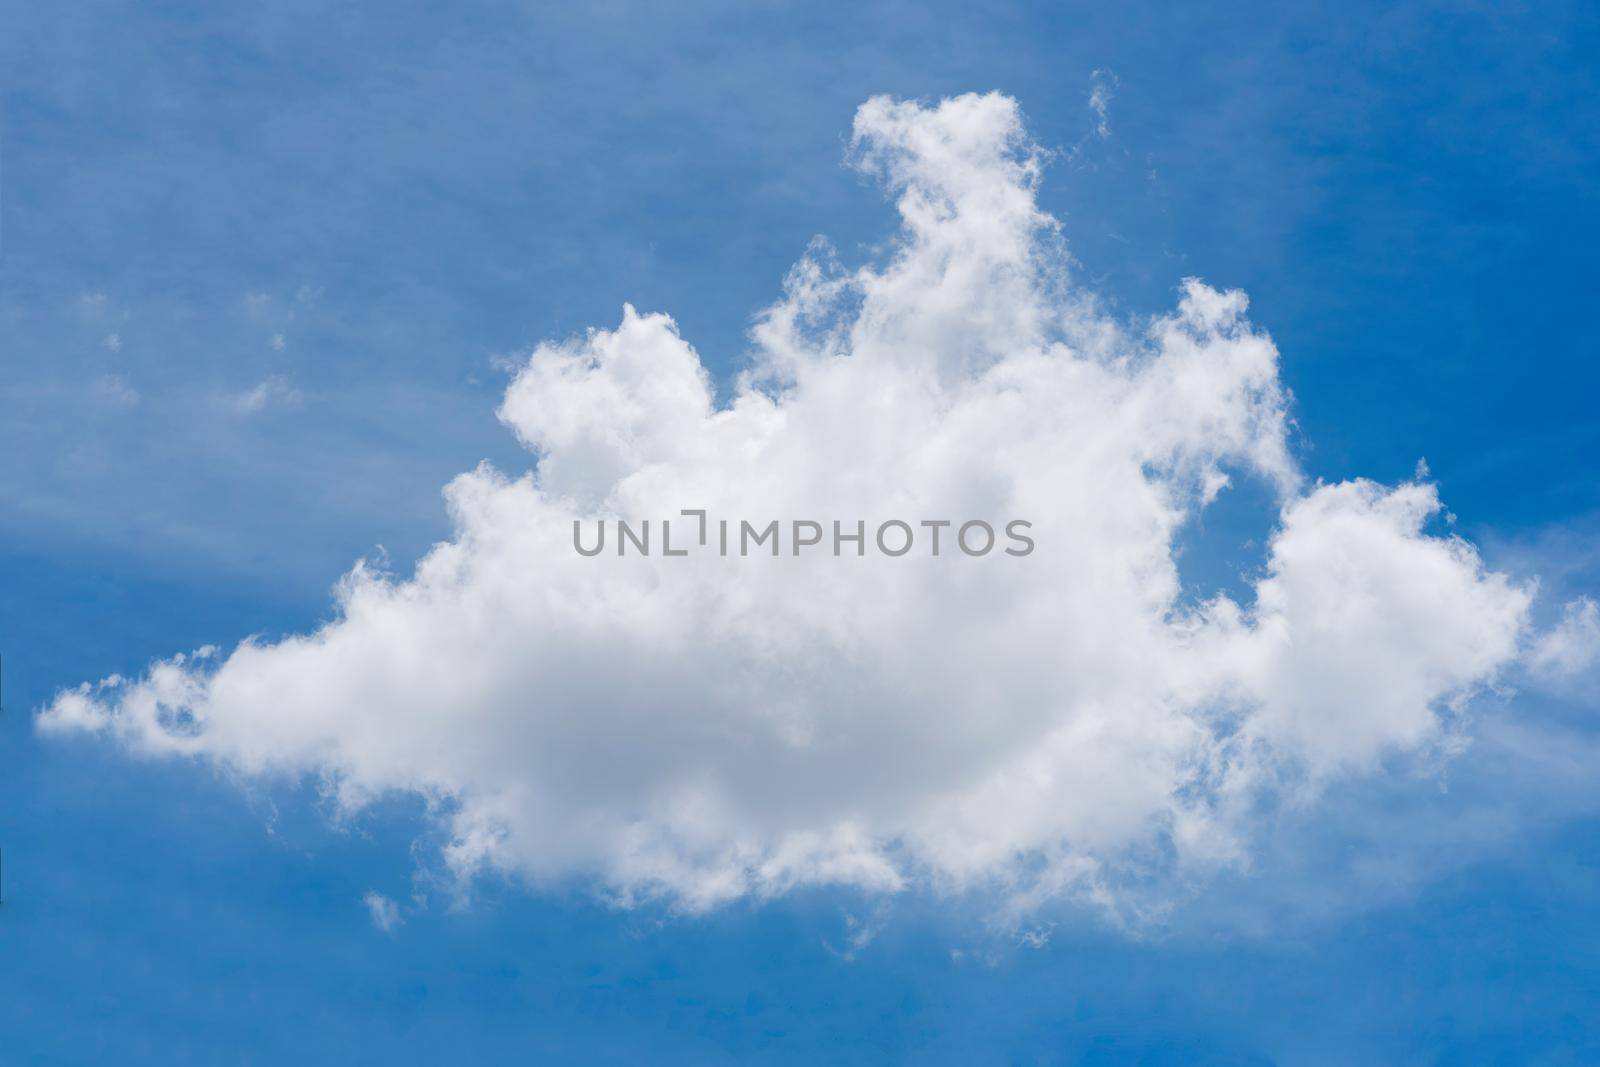 Single nature white cloud on blue sky background in daytime, photo of nature cloud for freedom and nature concept.